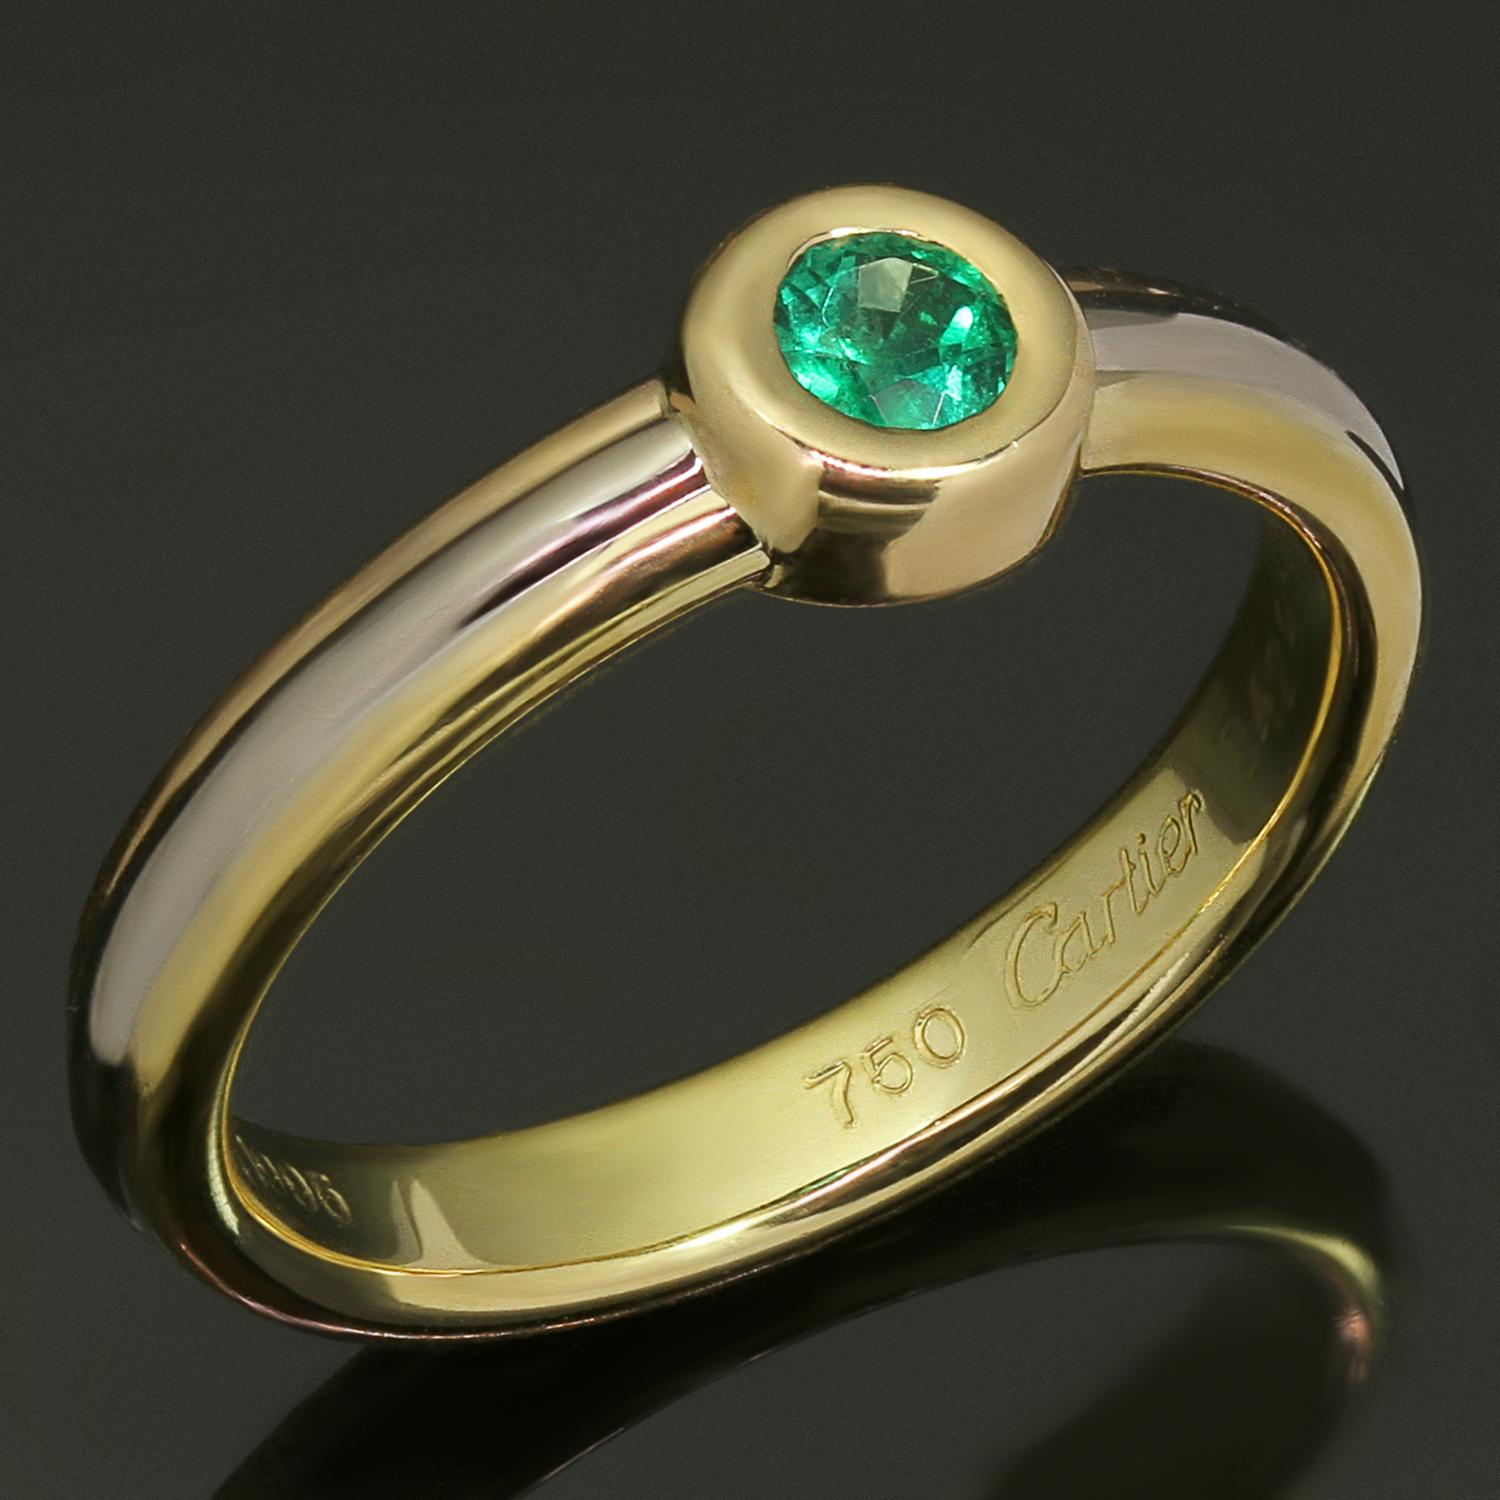 This chic Cartier ring from the iconic Trinity collection is crafted in 18k yellow, white, and rose gold and bezel-set with a round faceted emerald. Made in France circa 1995. Measurements: 0.23